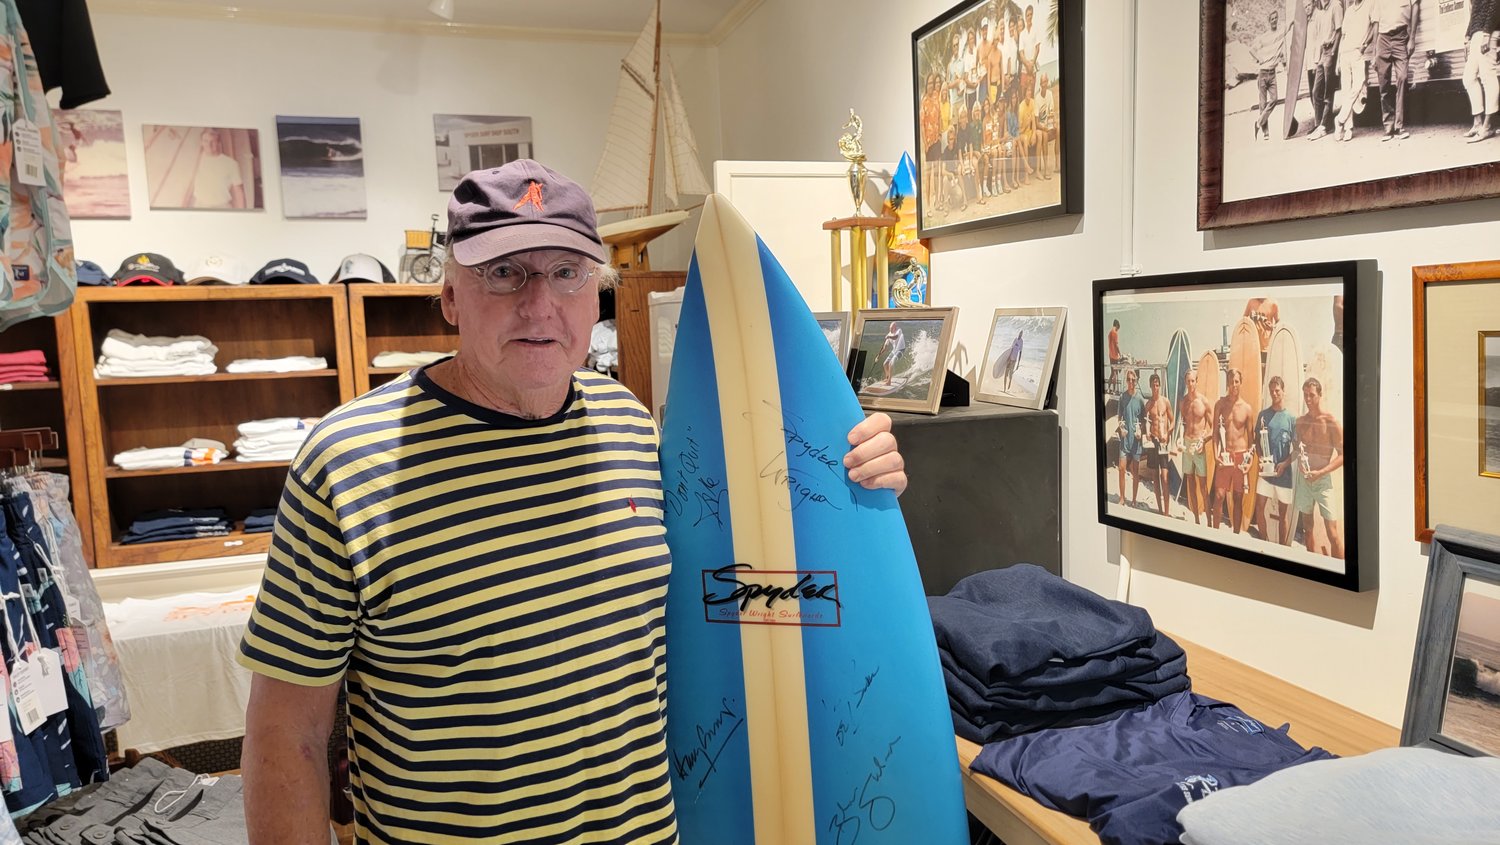 Wright at his surf shop on Main Street this summer.